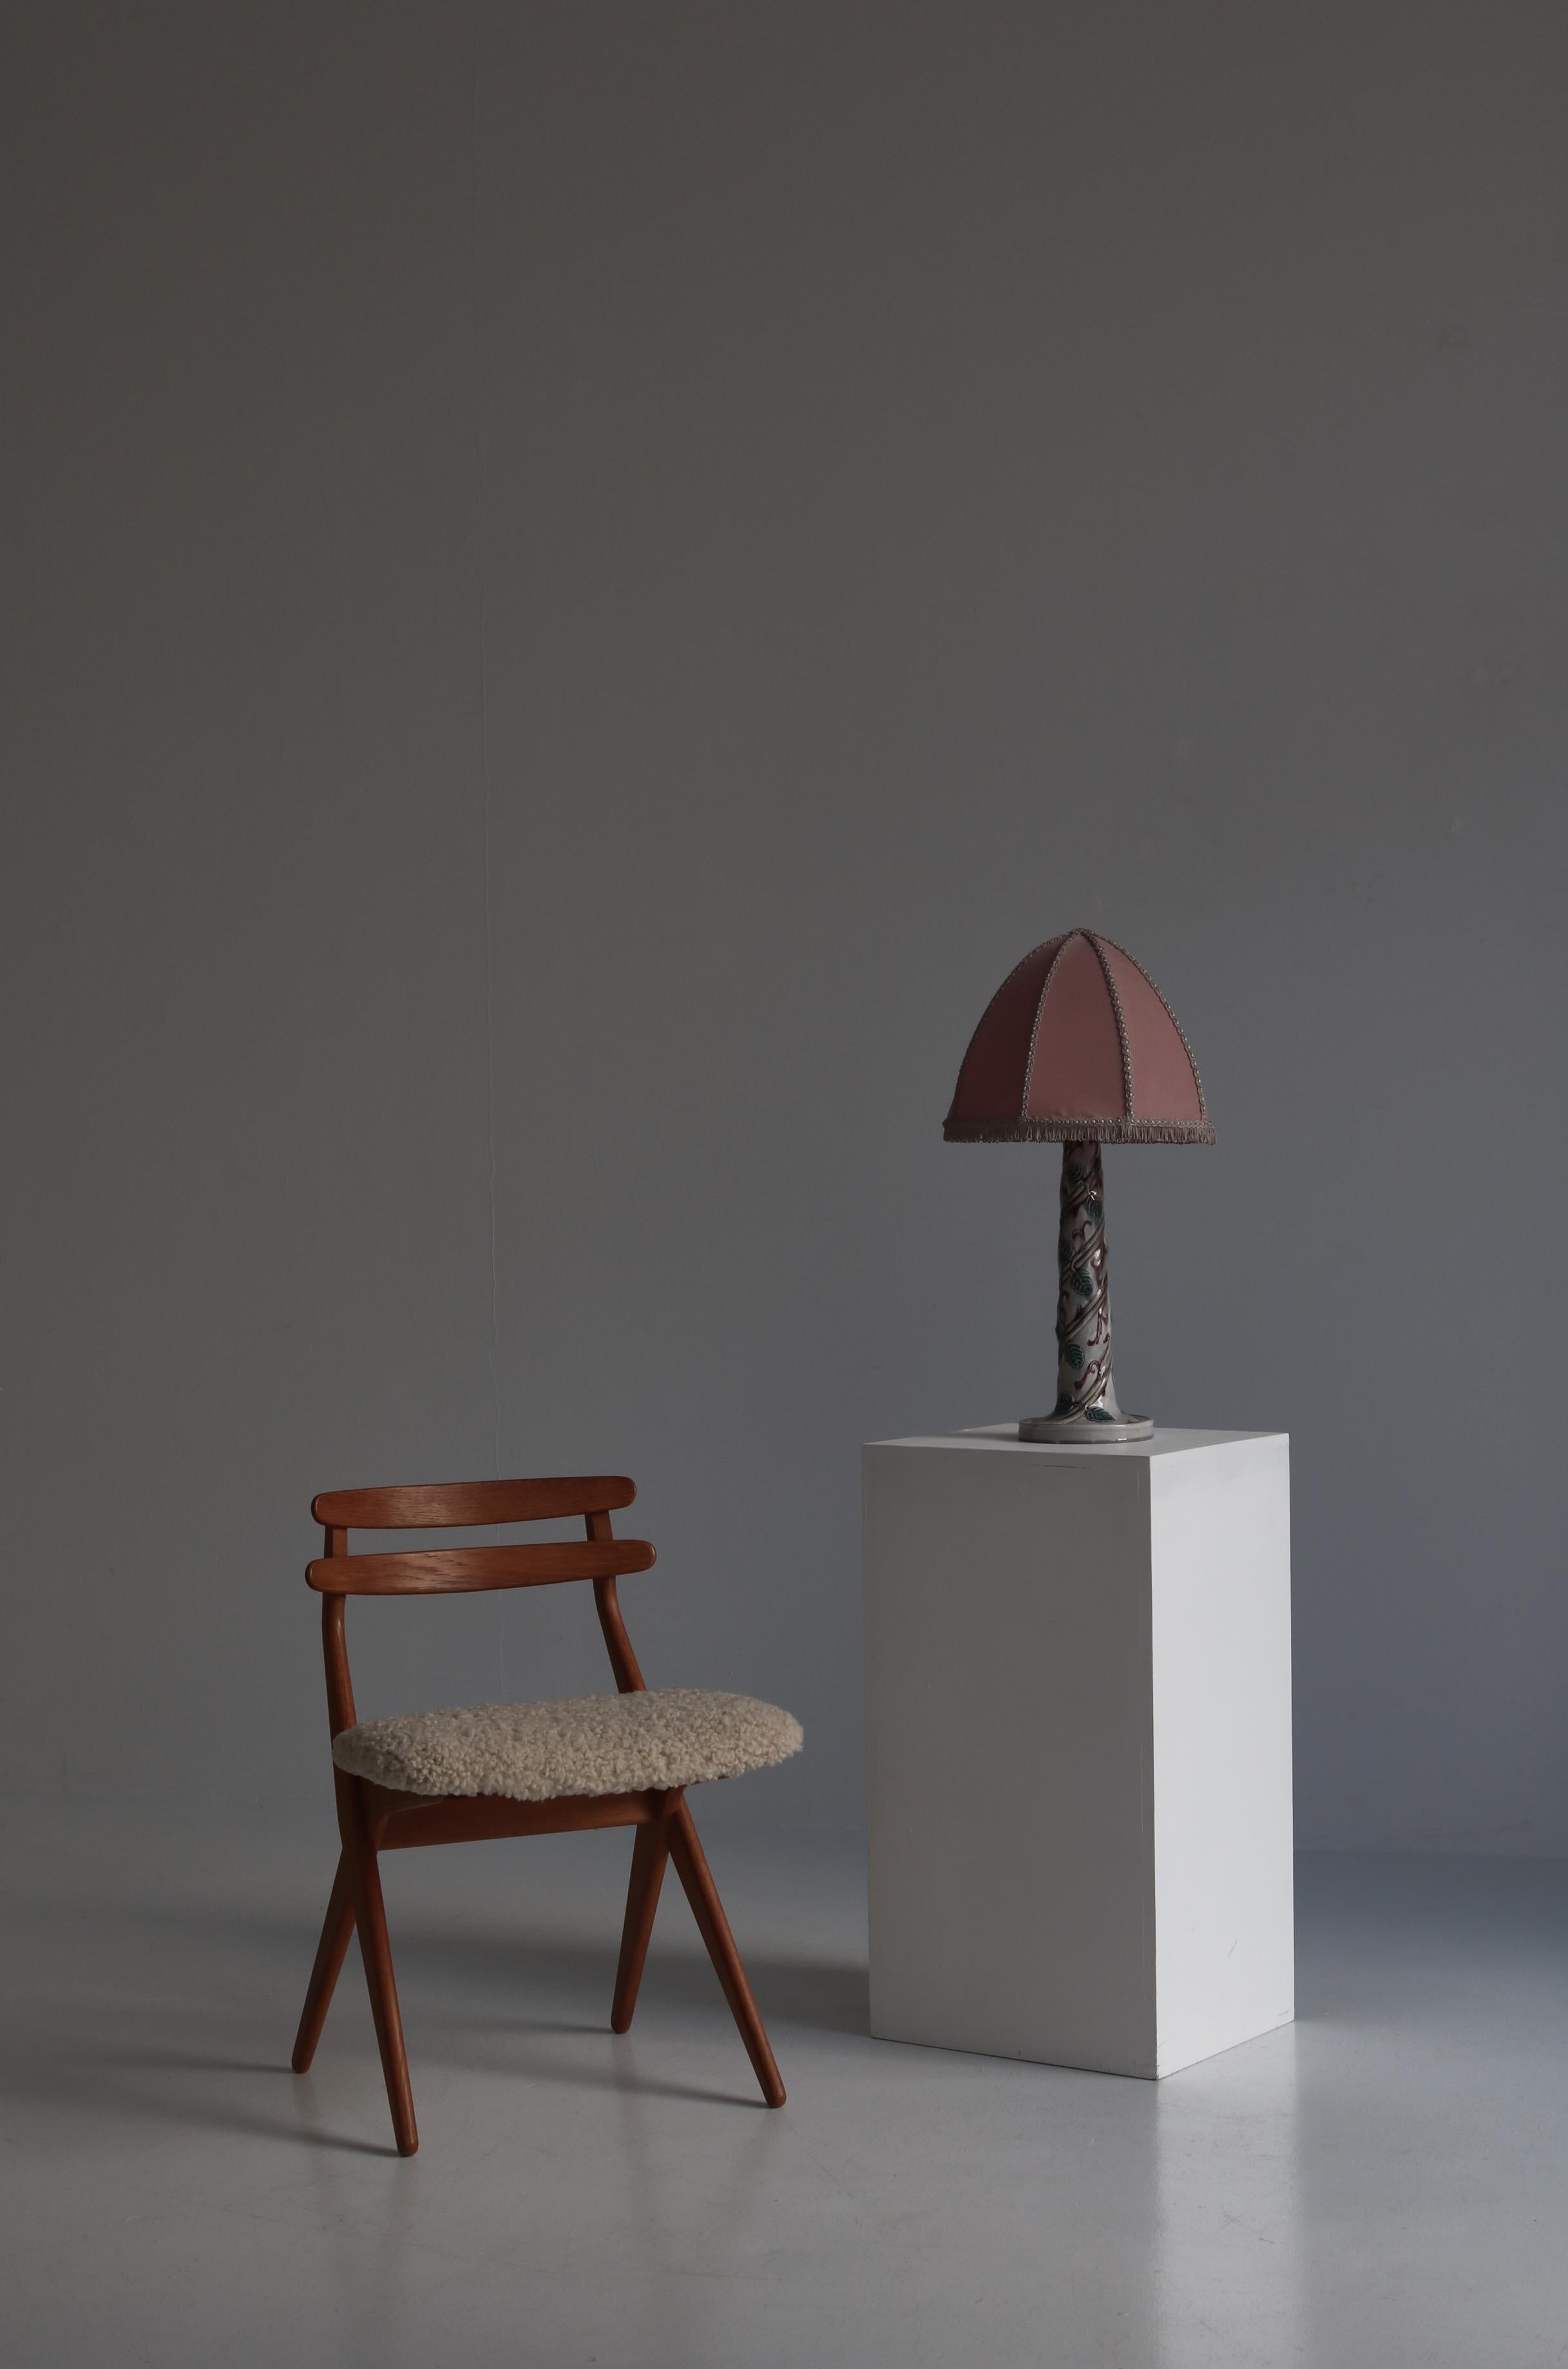 Wonderful and unique table lamp made by Swedish artist Louise Adelborg in the 1920s. The lamp base is made from glazed porcelain with handmade foliage decoration. The lamp is mounted with the original handmade pink shade.

From 1915 to her death